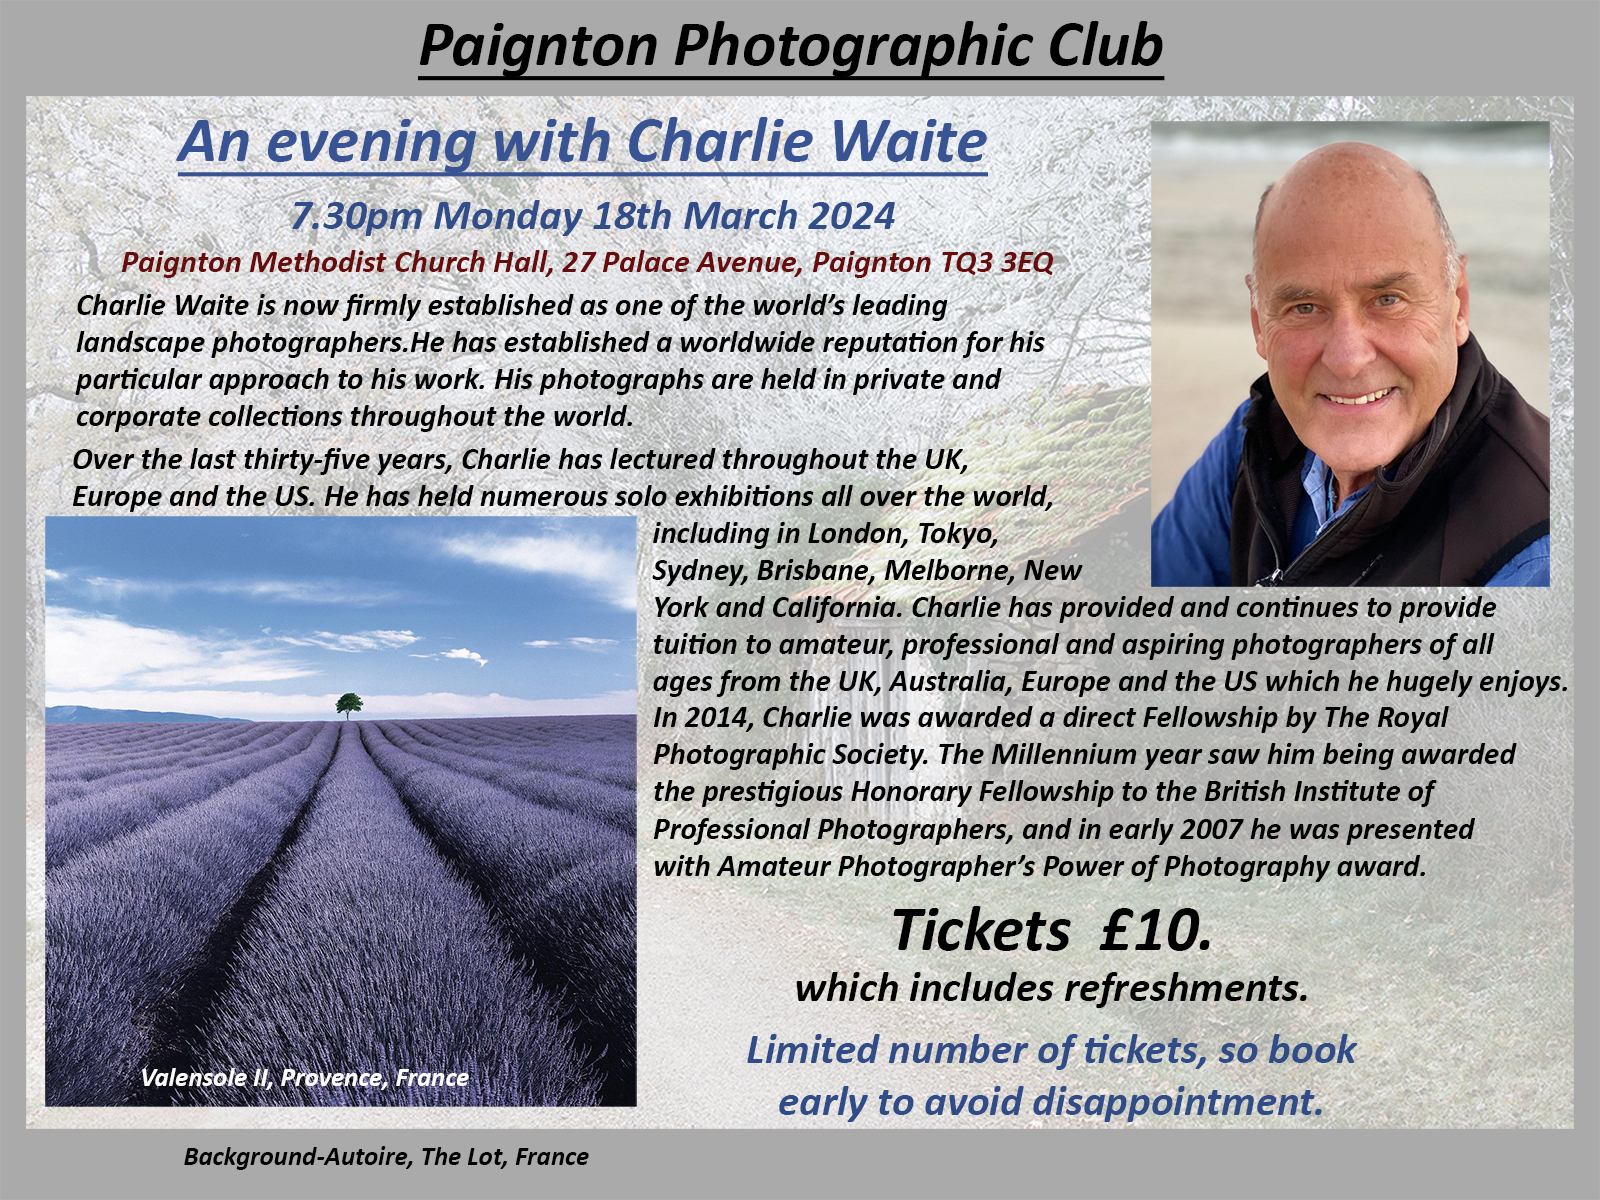 Charlie Waite visits Paignton Photographic Club - One Night Only